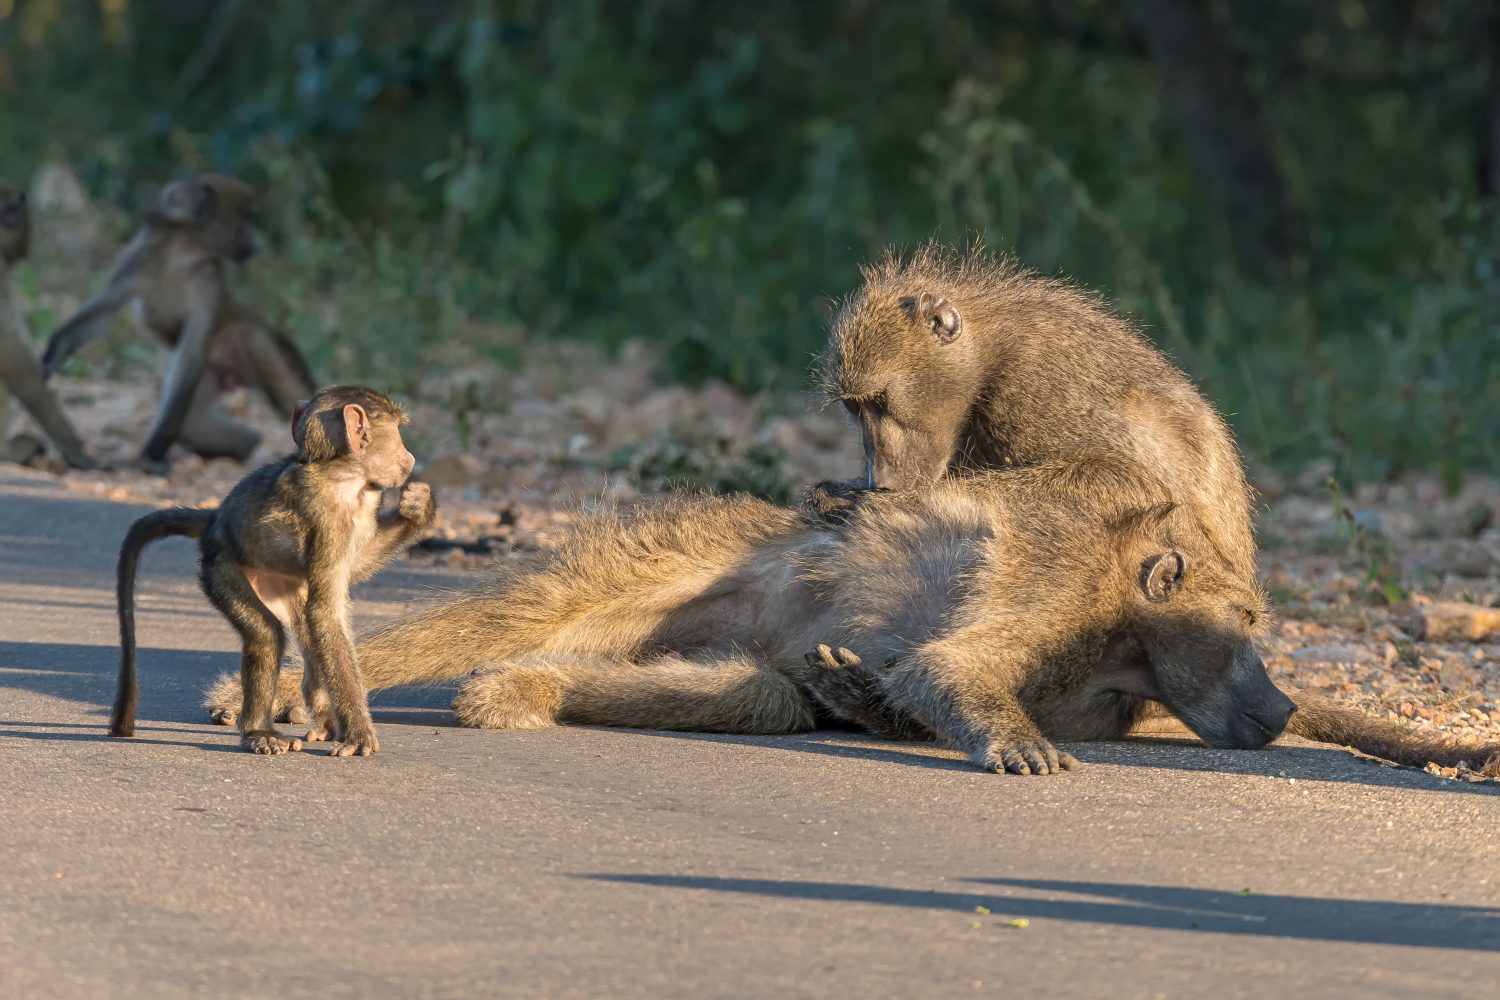 A chacma baboon grooming another baboon